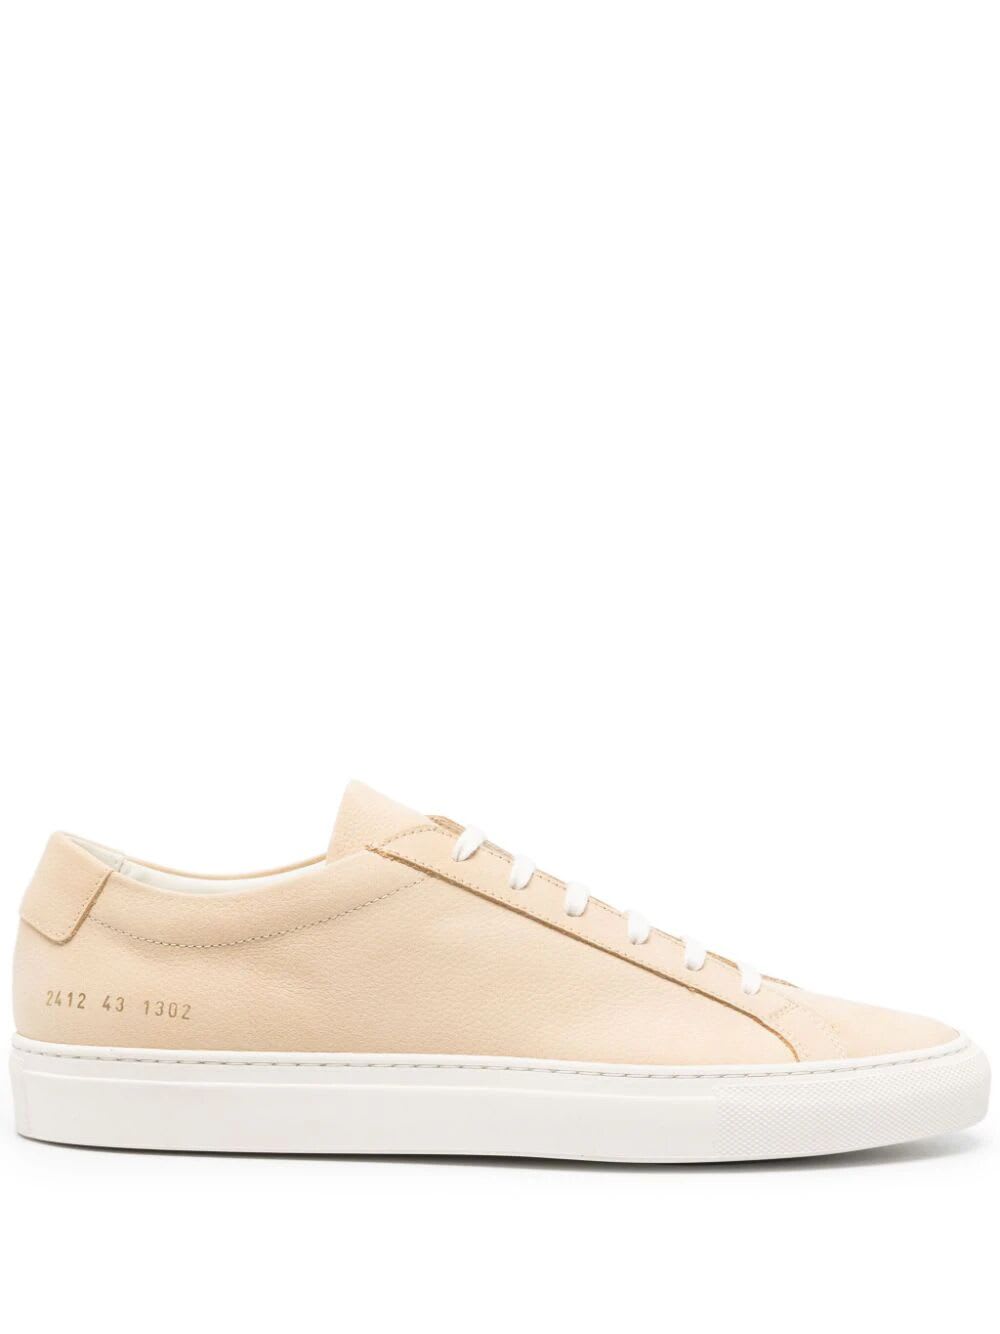 Shop Common Projects Contrast Achilles Sneaker In Tan